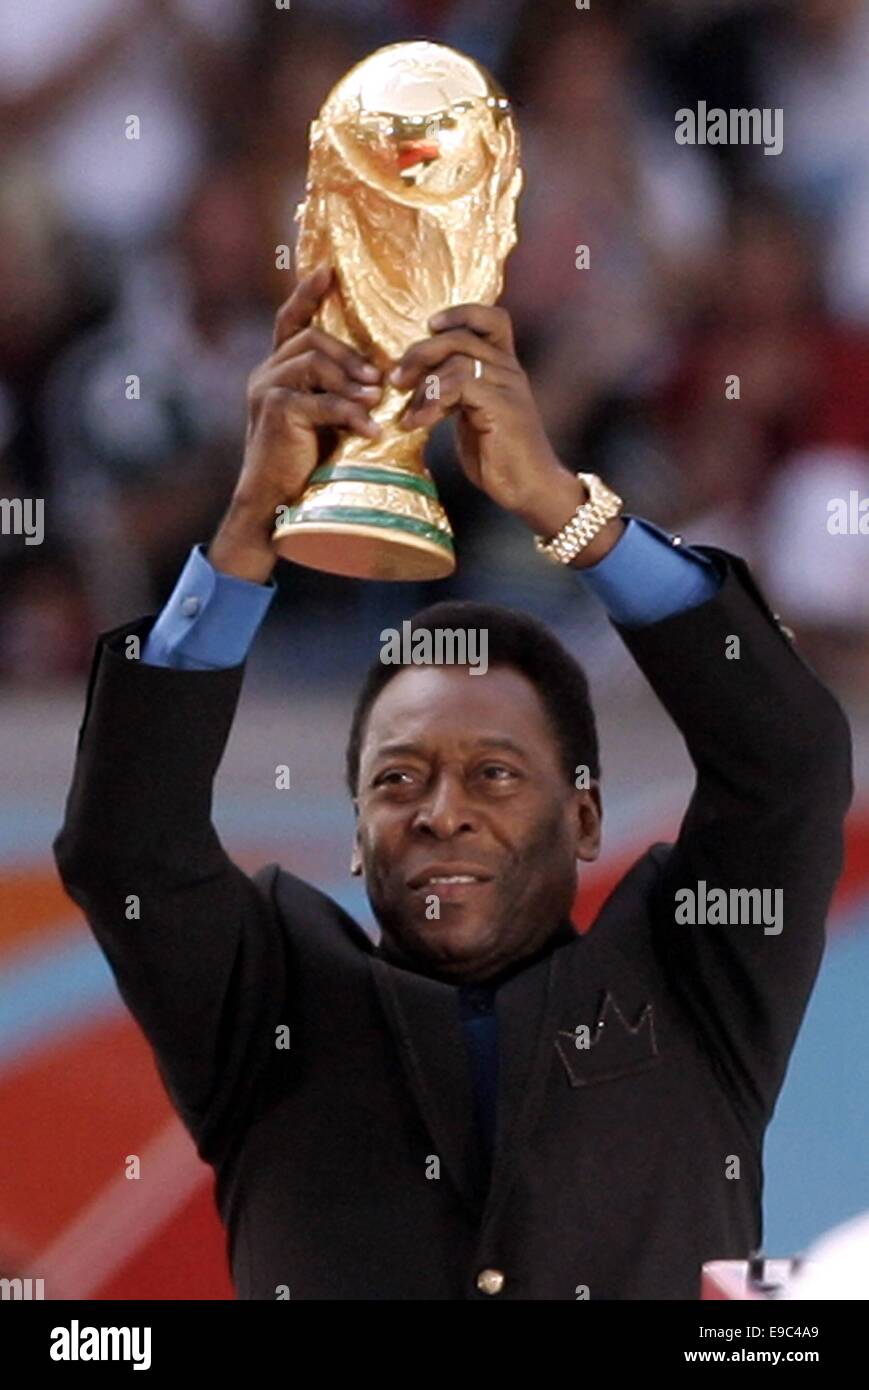 09.06.2006 Pele (Brasil) lifts up the Jules Rimet Cup (World Cup Trophy) Stock Photo